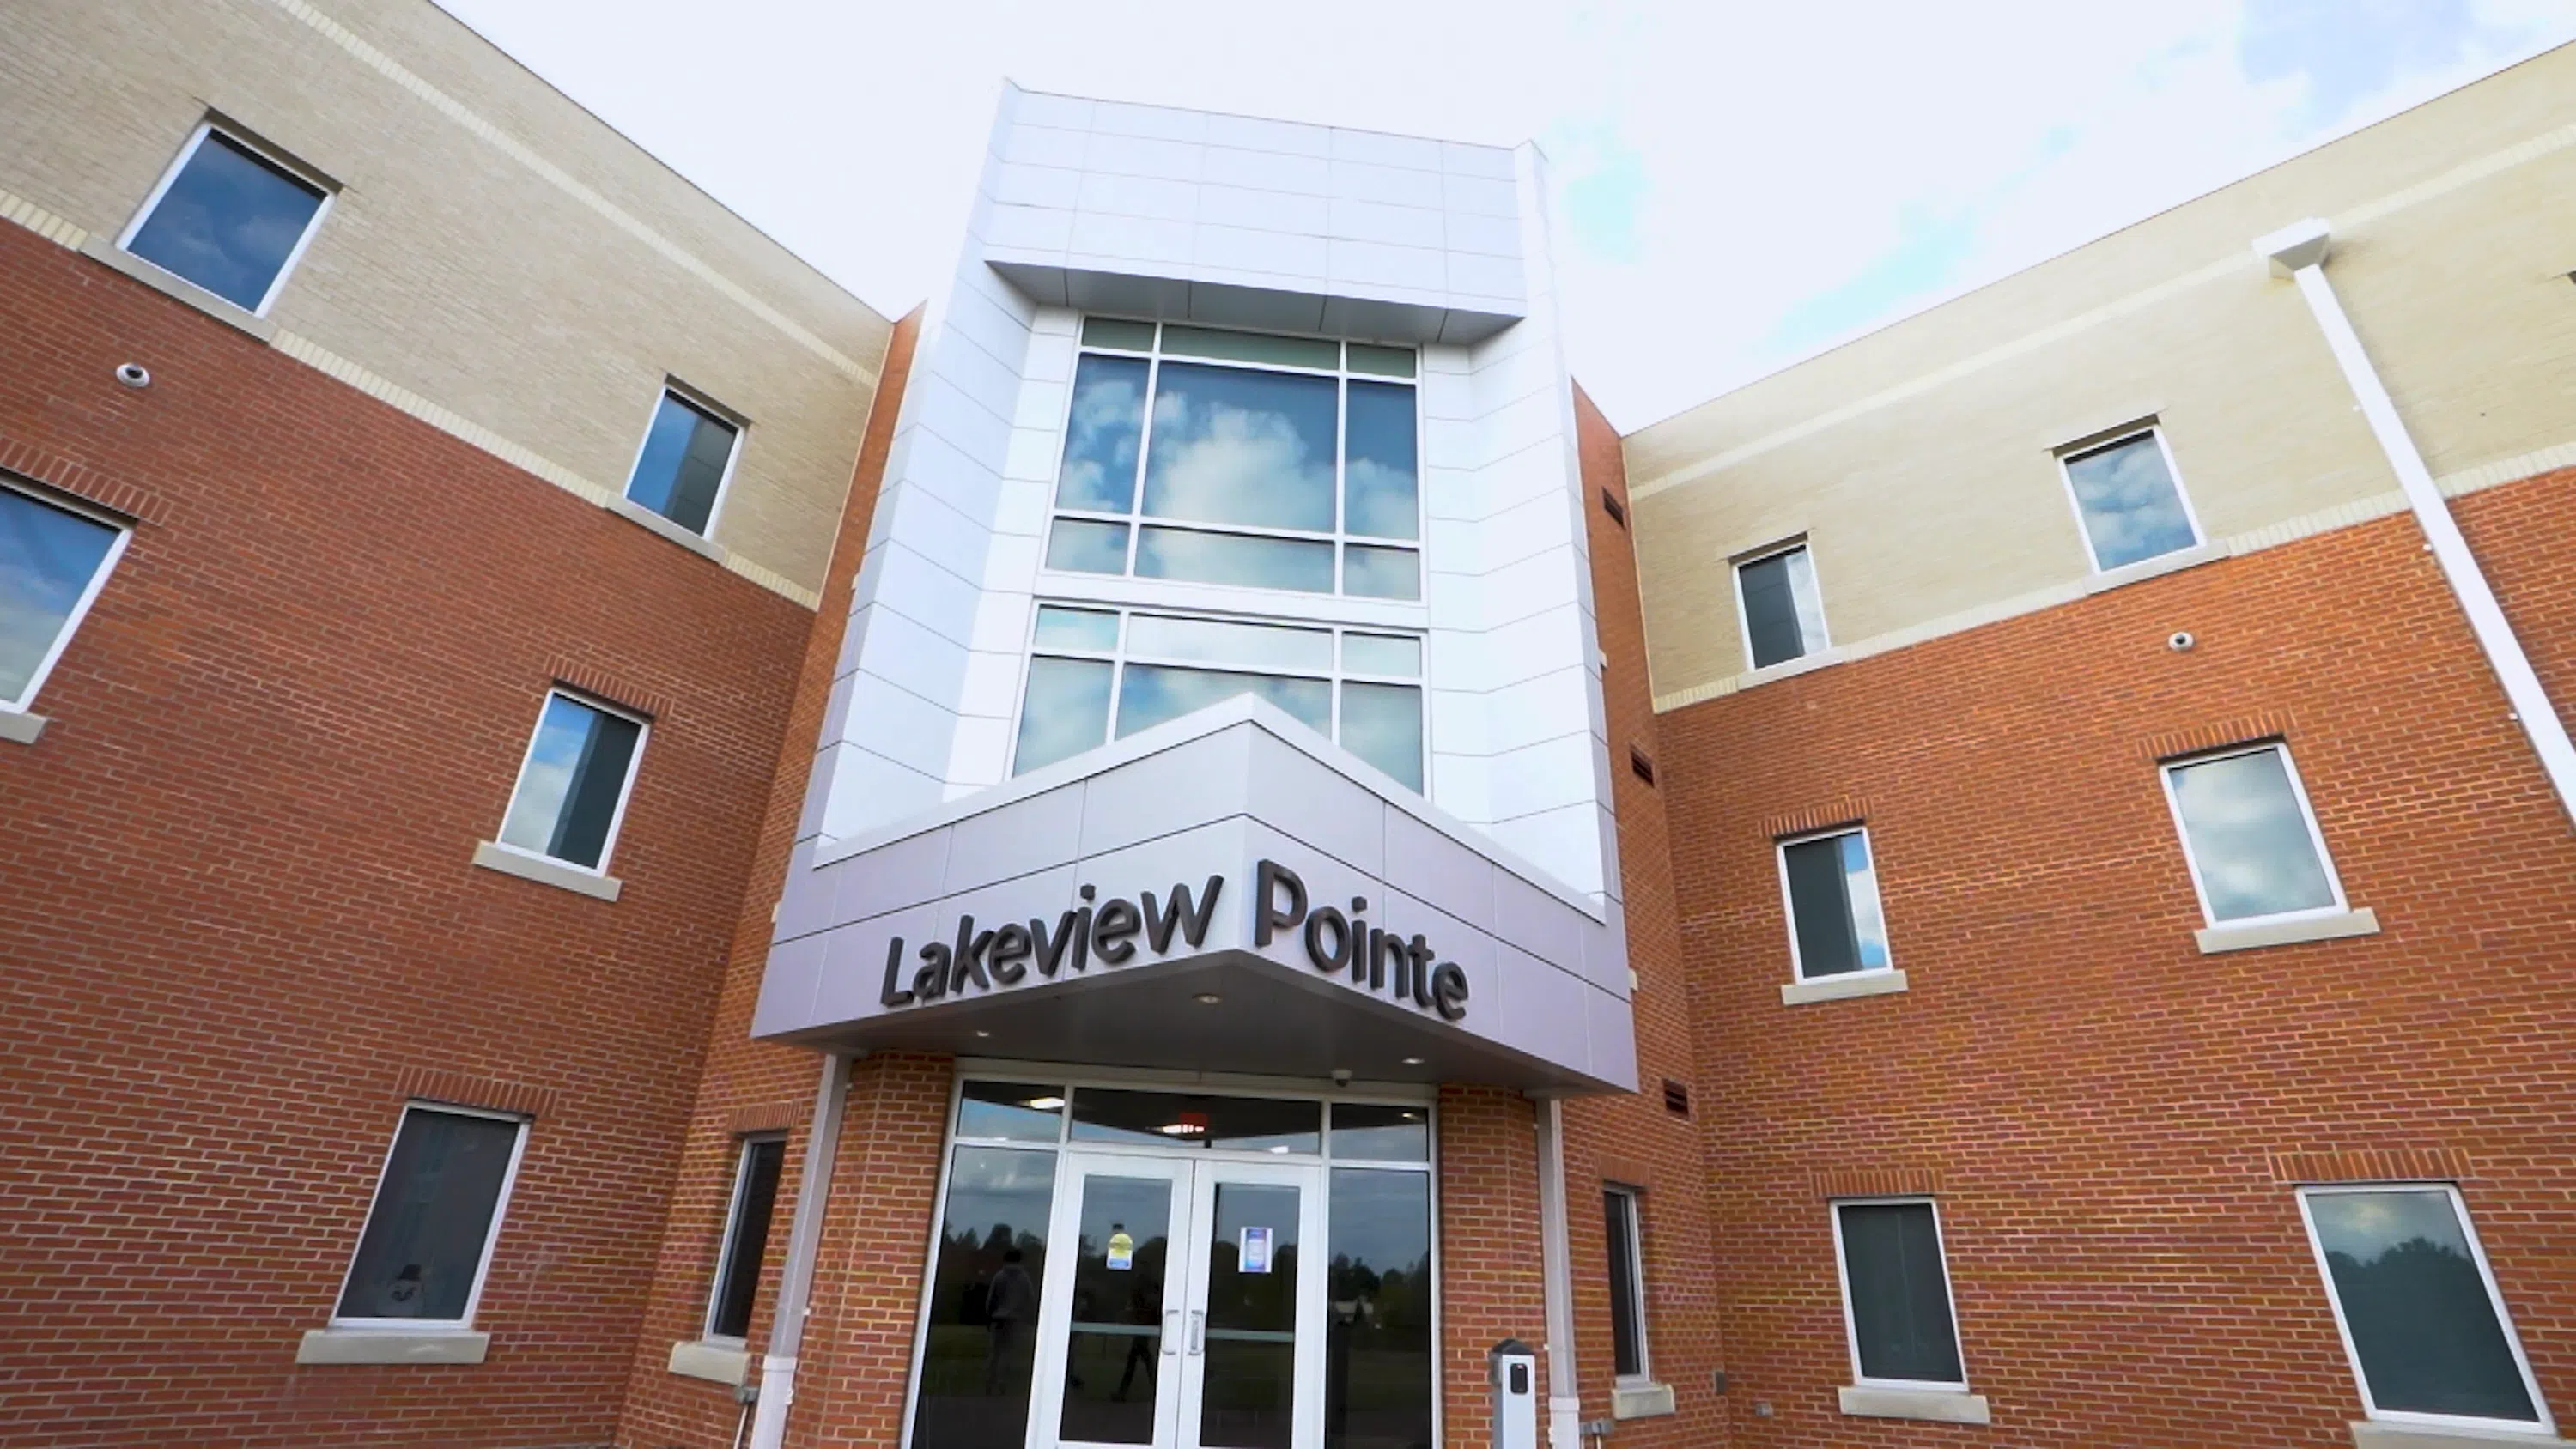 The entrance to Lakeview Pointe.